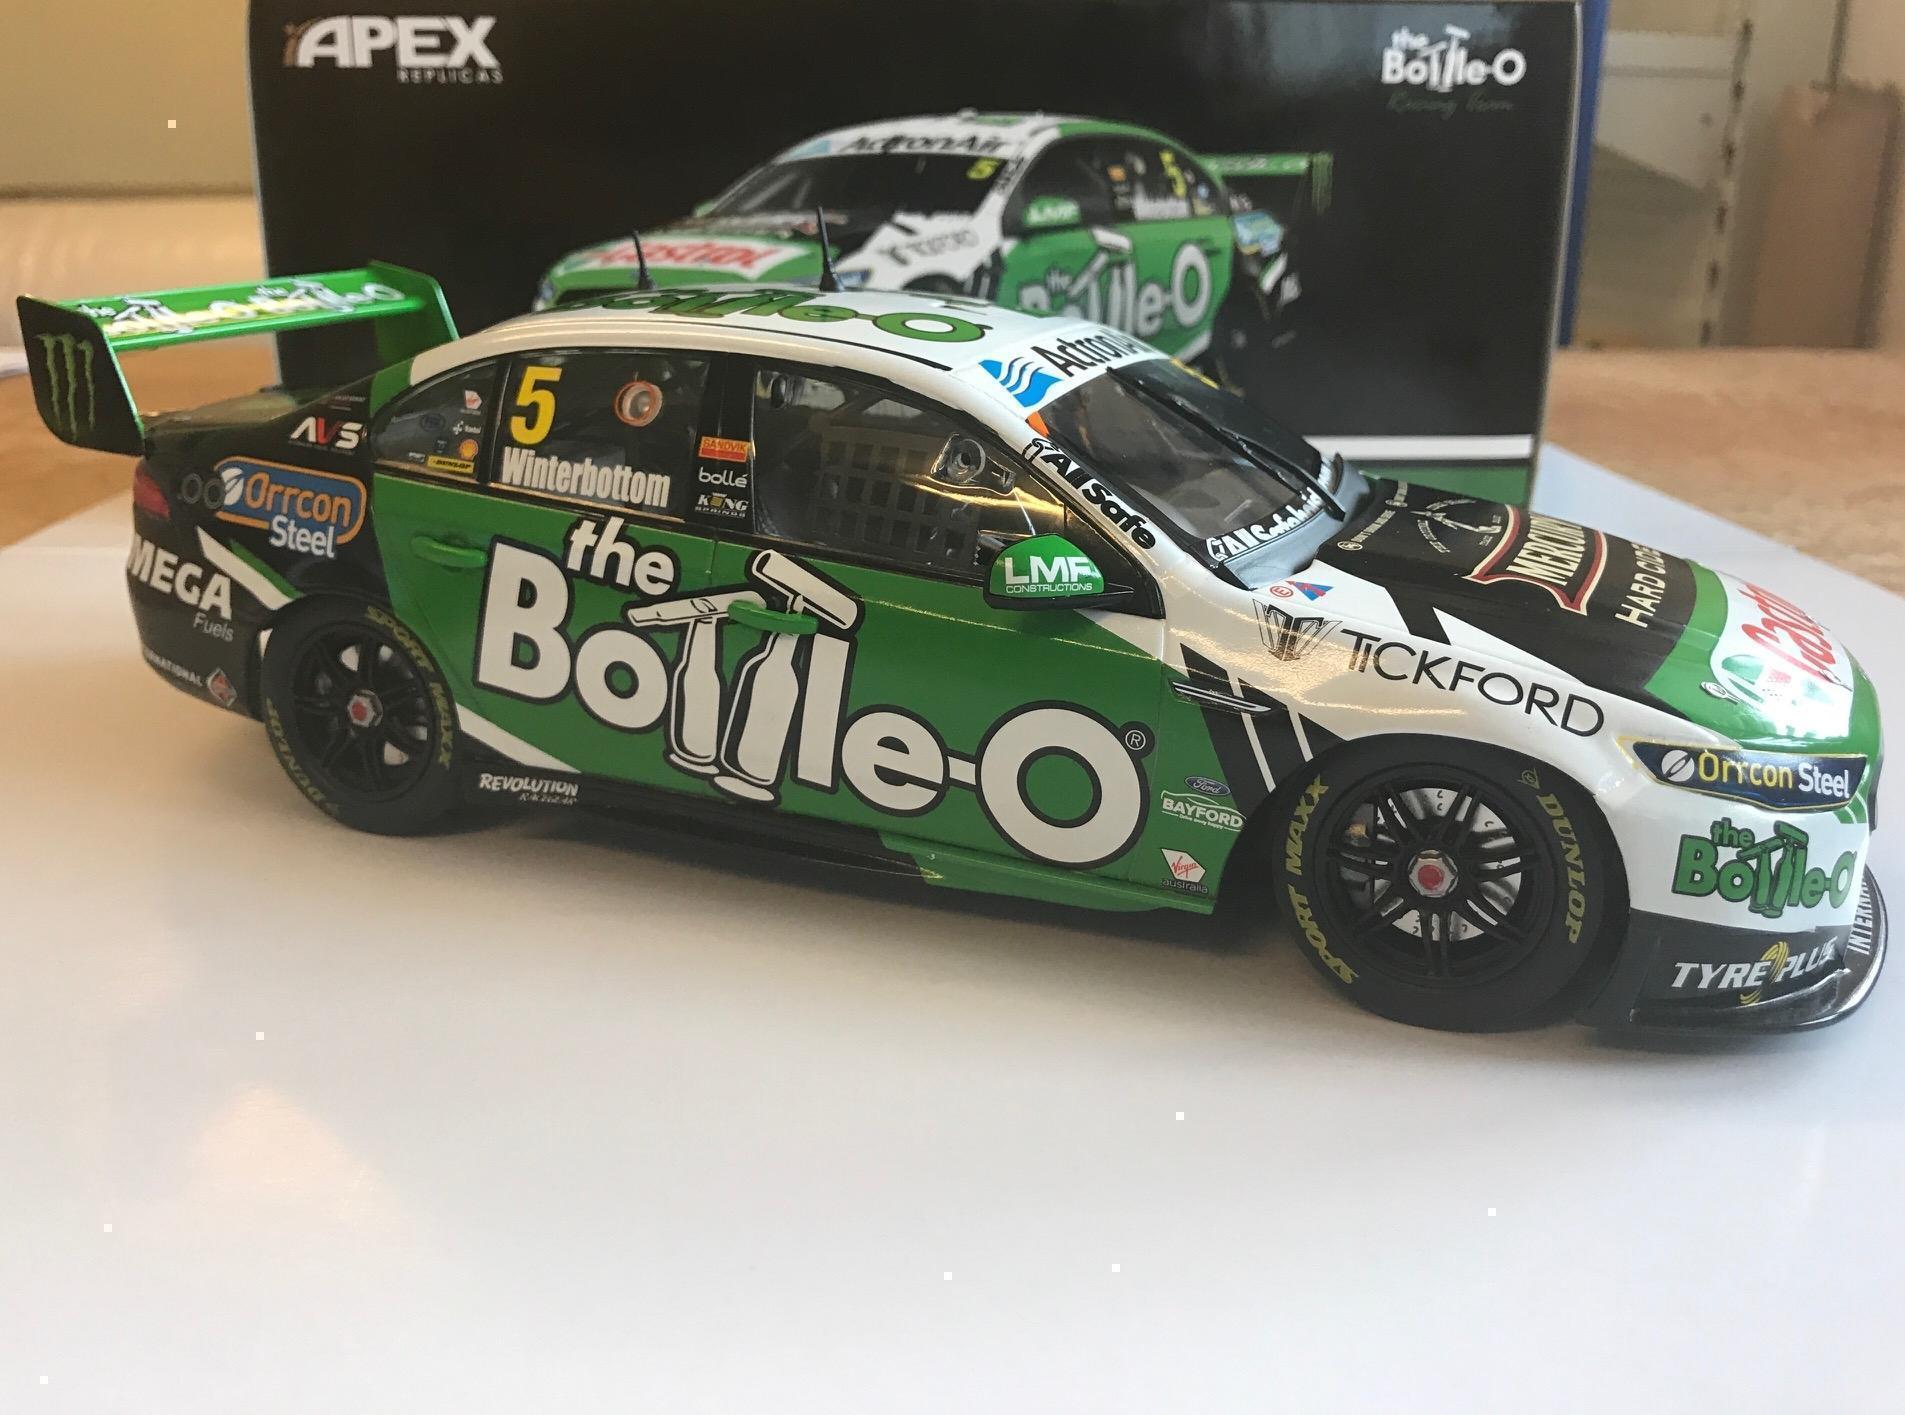 2018 Mark Winterbottom #5 The Bottle-o Racing Livery  Ford Falcon FGX 1:18 Scale Model Car